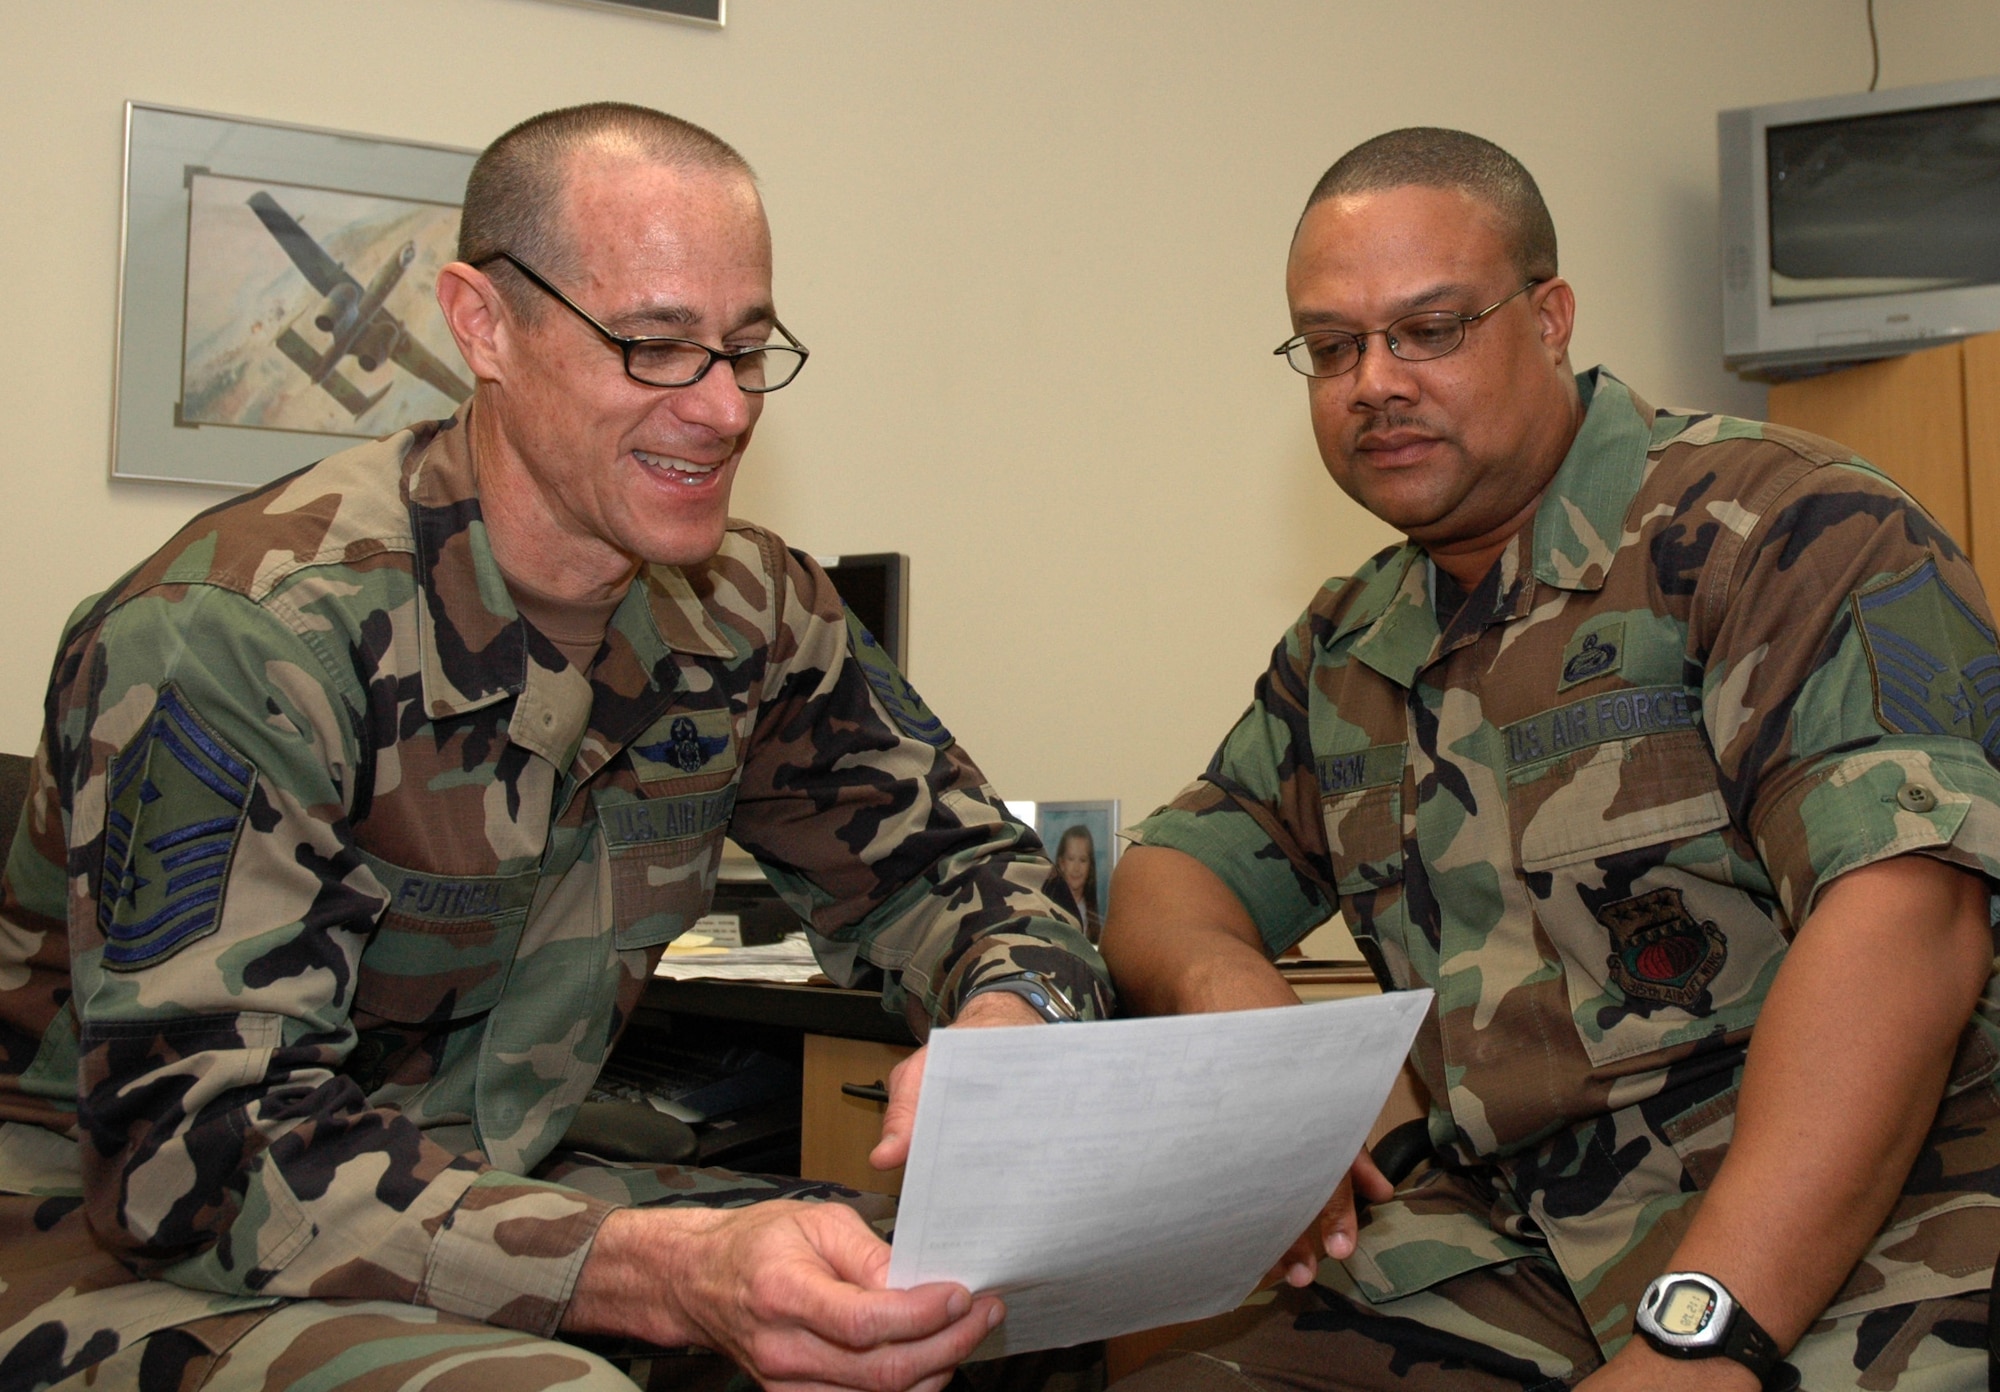 Senior Master Sgt. Ben Futrell, incoming 315th Airlift Wing command chief master sergeant, (left) mentors troops as part of his job.  Sergeant Futrell will start his new position and sew on chief master sergeant on May 1. (Photo by Tony Clark, USAFR)